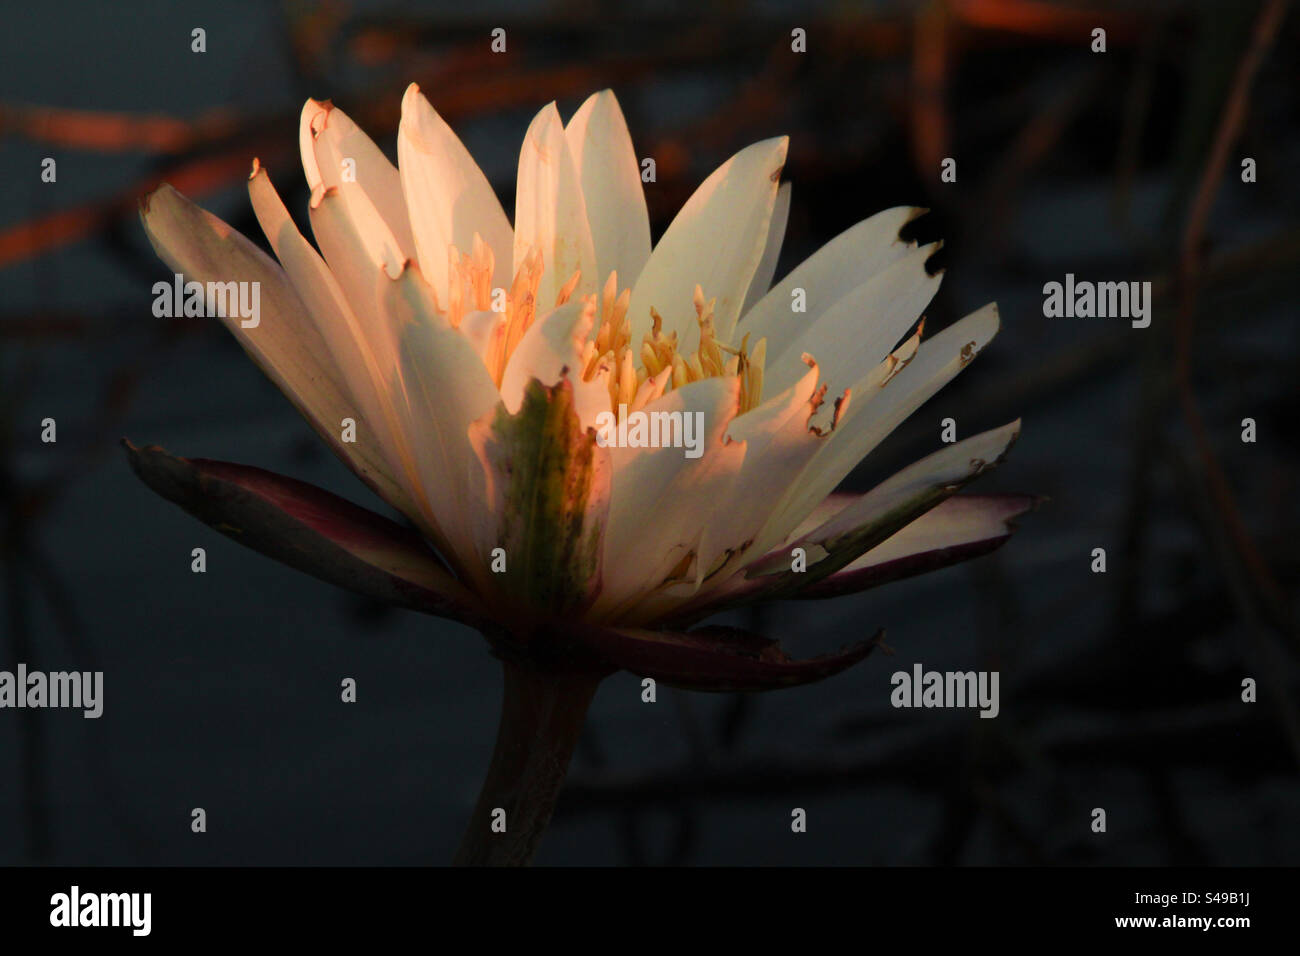 Water lily in full bloom at sunset Stock Photo